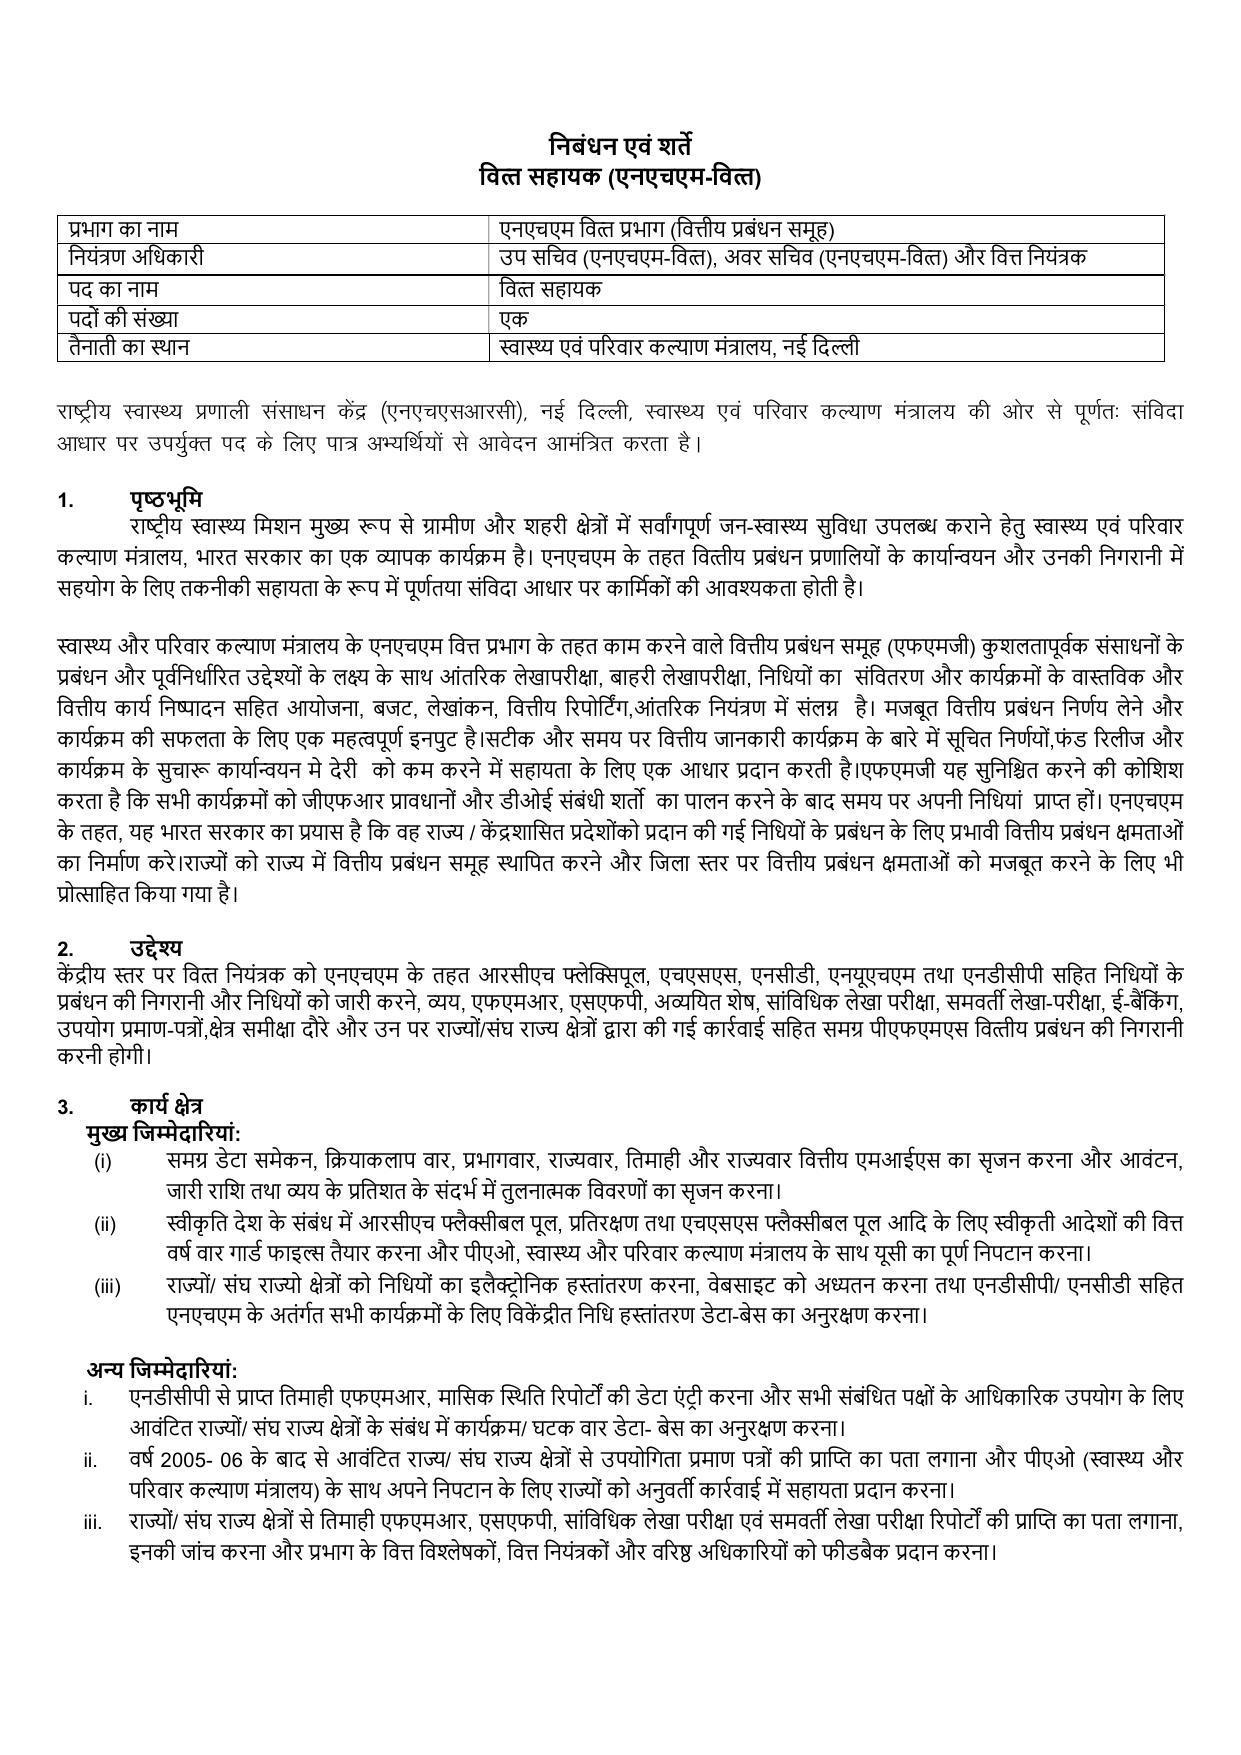 NHSRC Invites Application for Finance Assistant Recruitment 2022 - Page 2